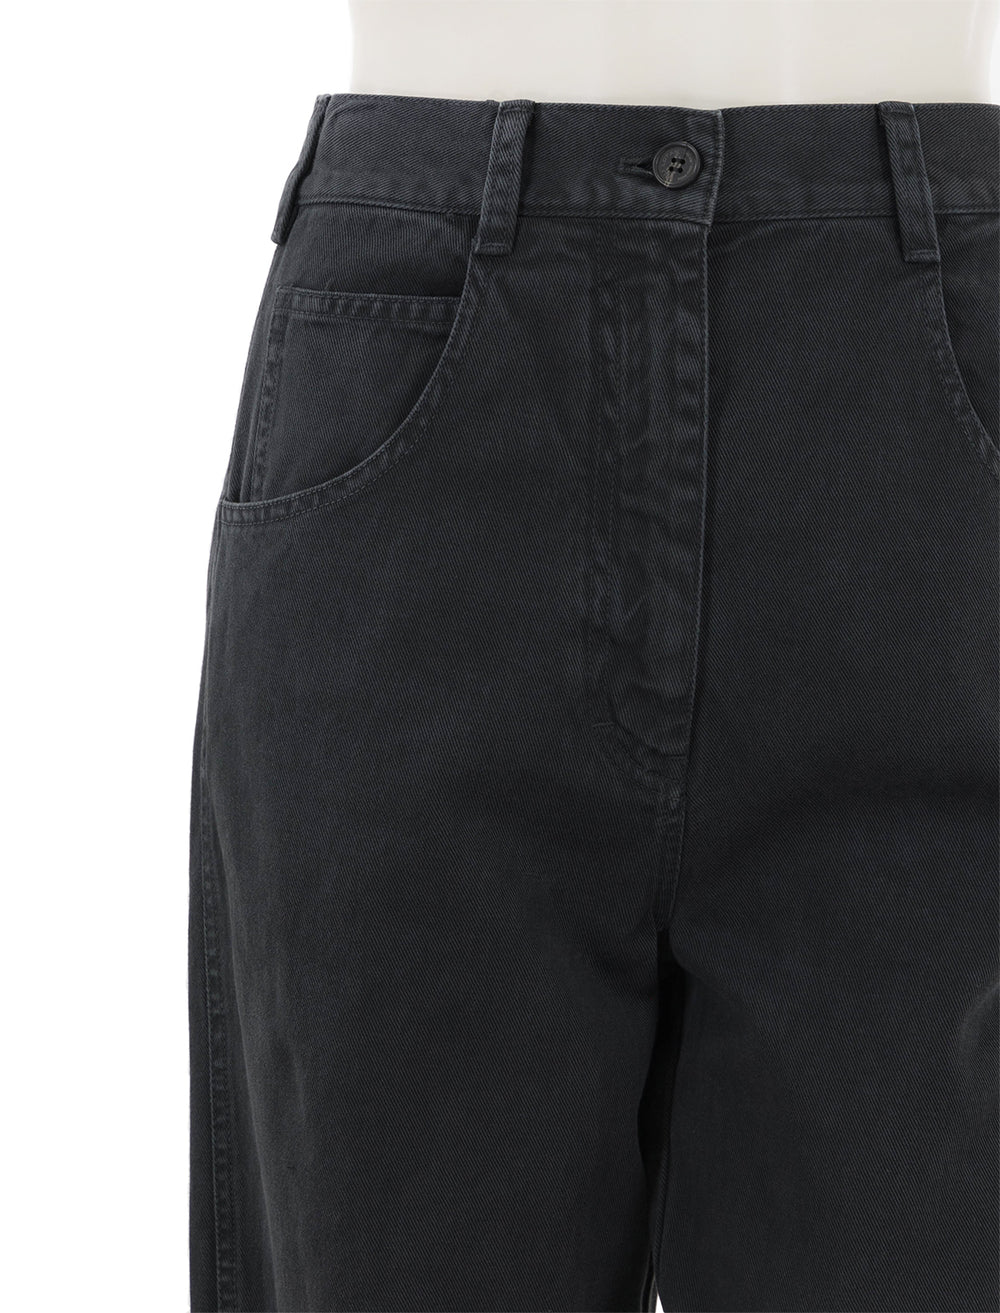 Close-up view of Nili Lotan's aaron pant in carbon.